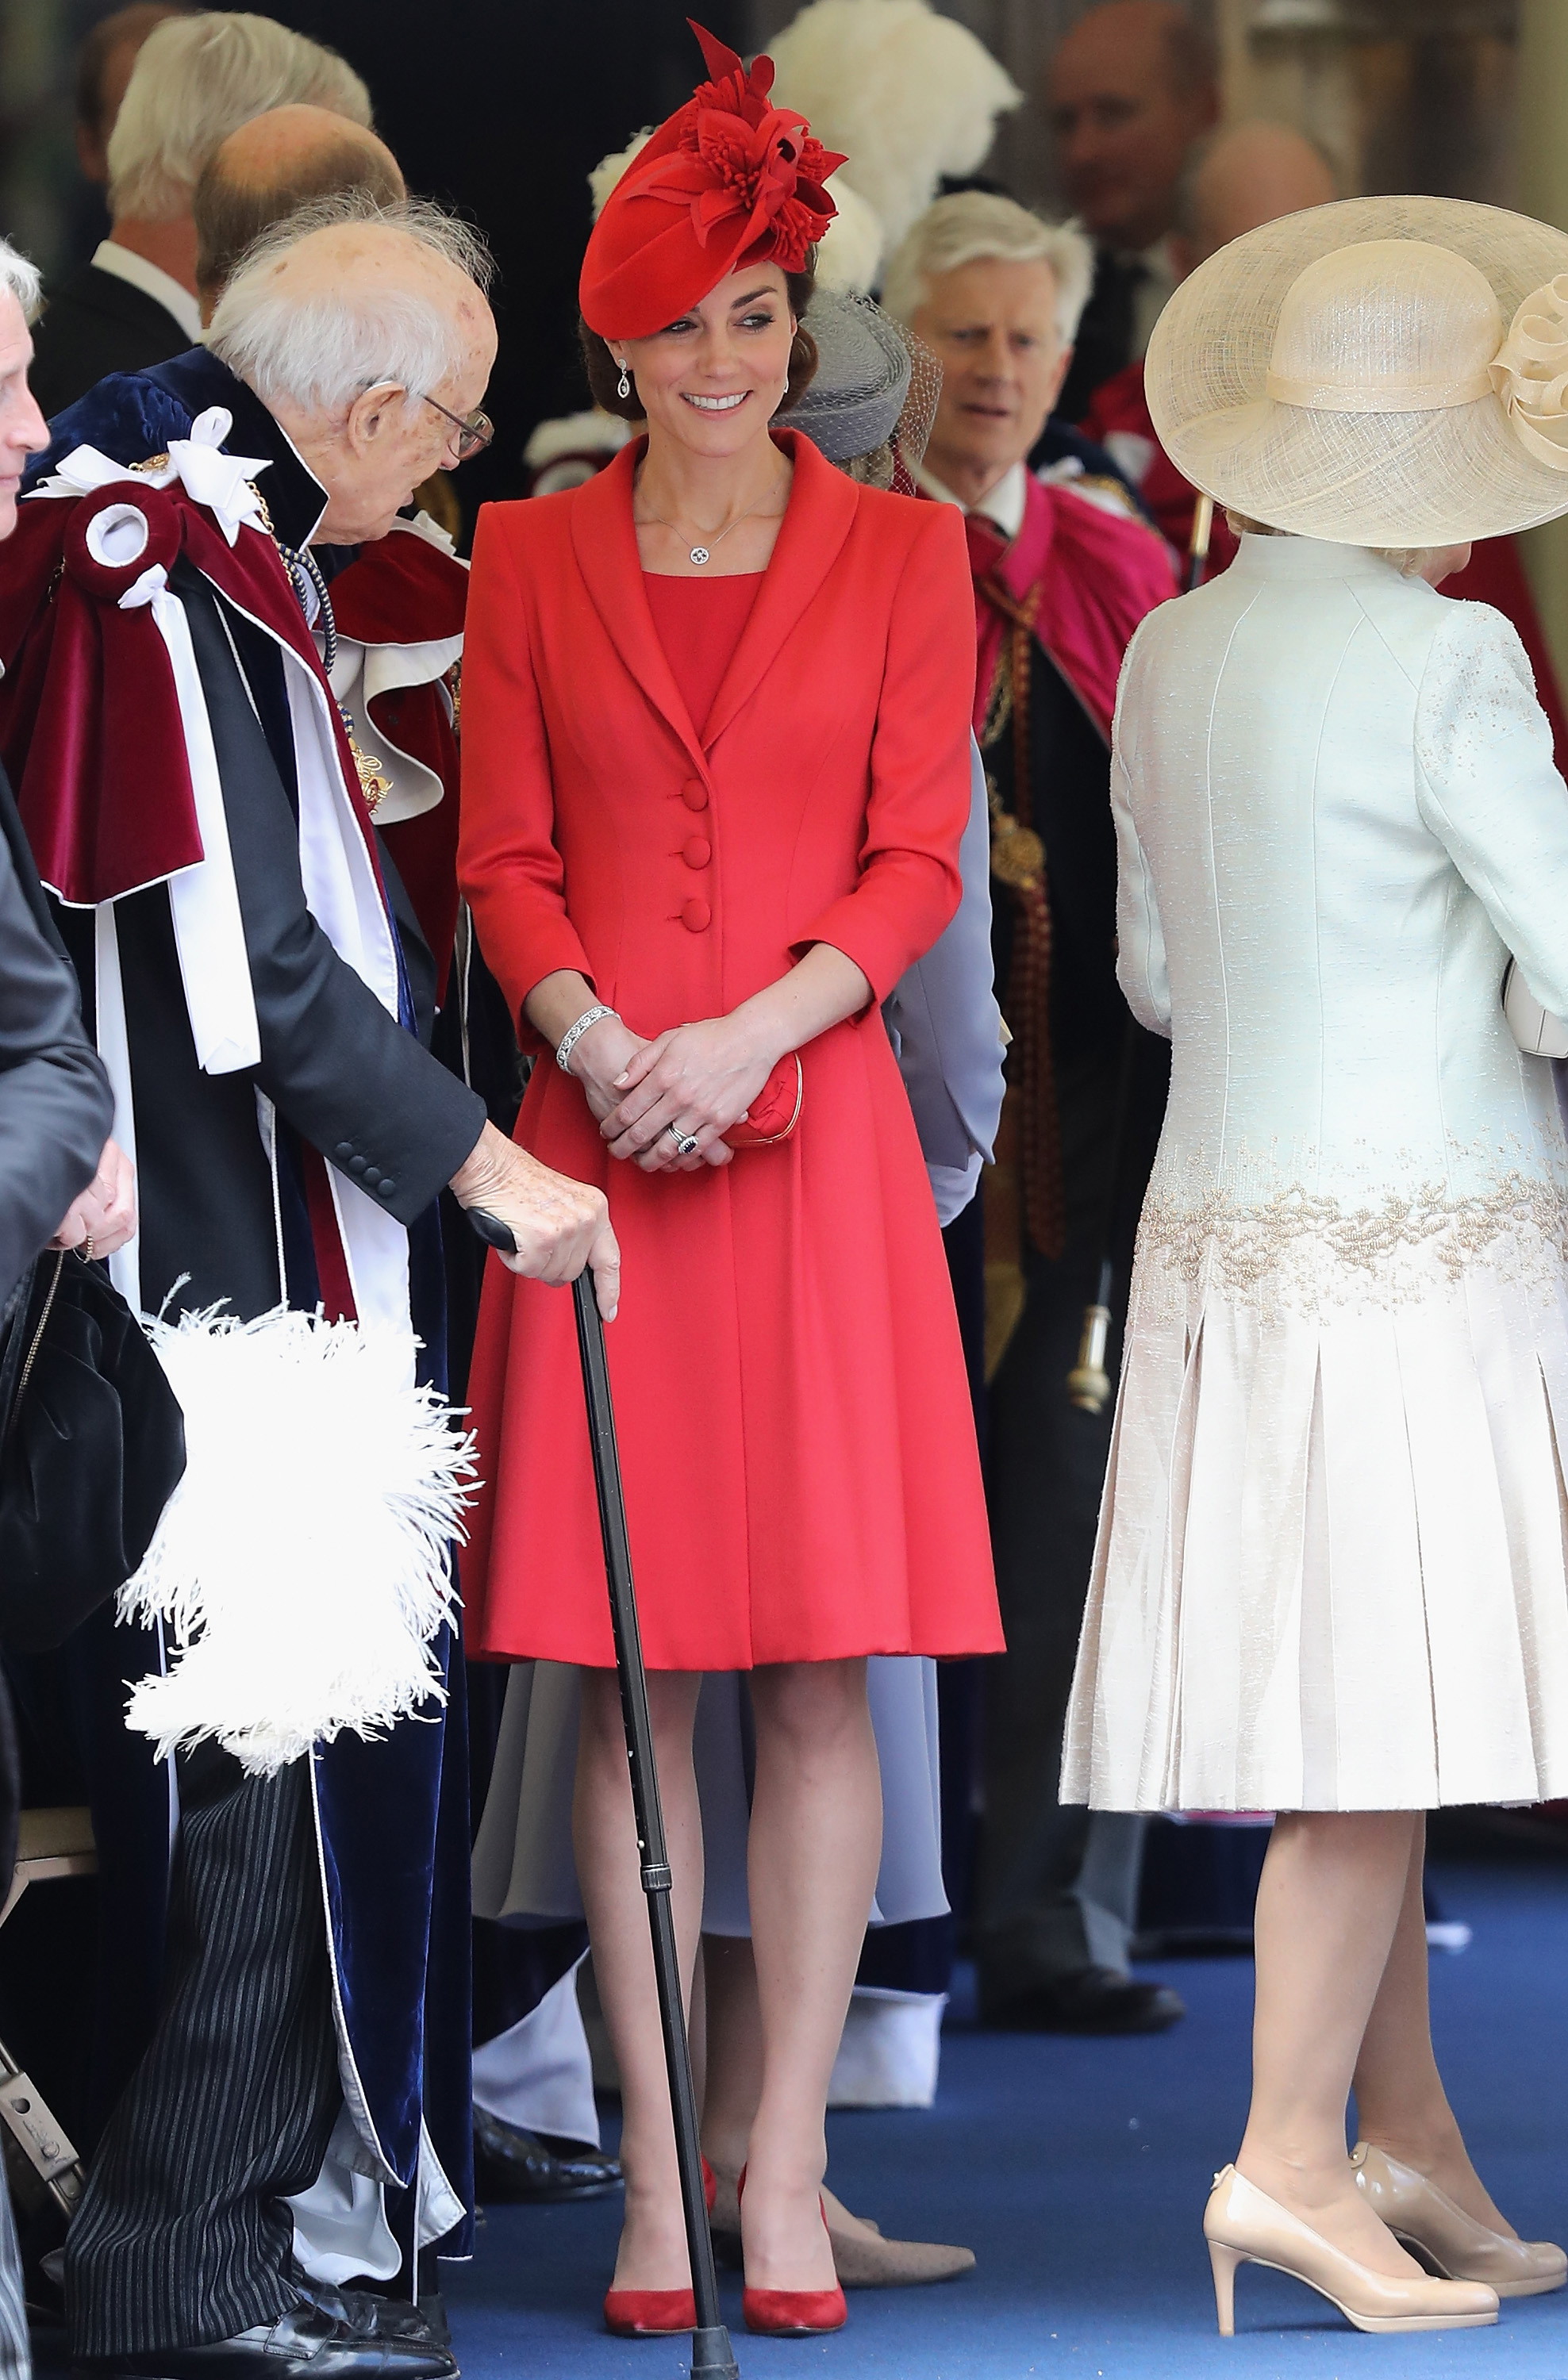 Catherine, Duchess of Cambridge, chats with guests after the Order of the Garter Service at Windsor Castle in England on June 13, 2016.